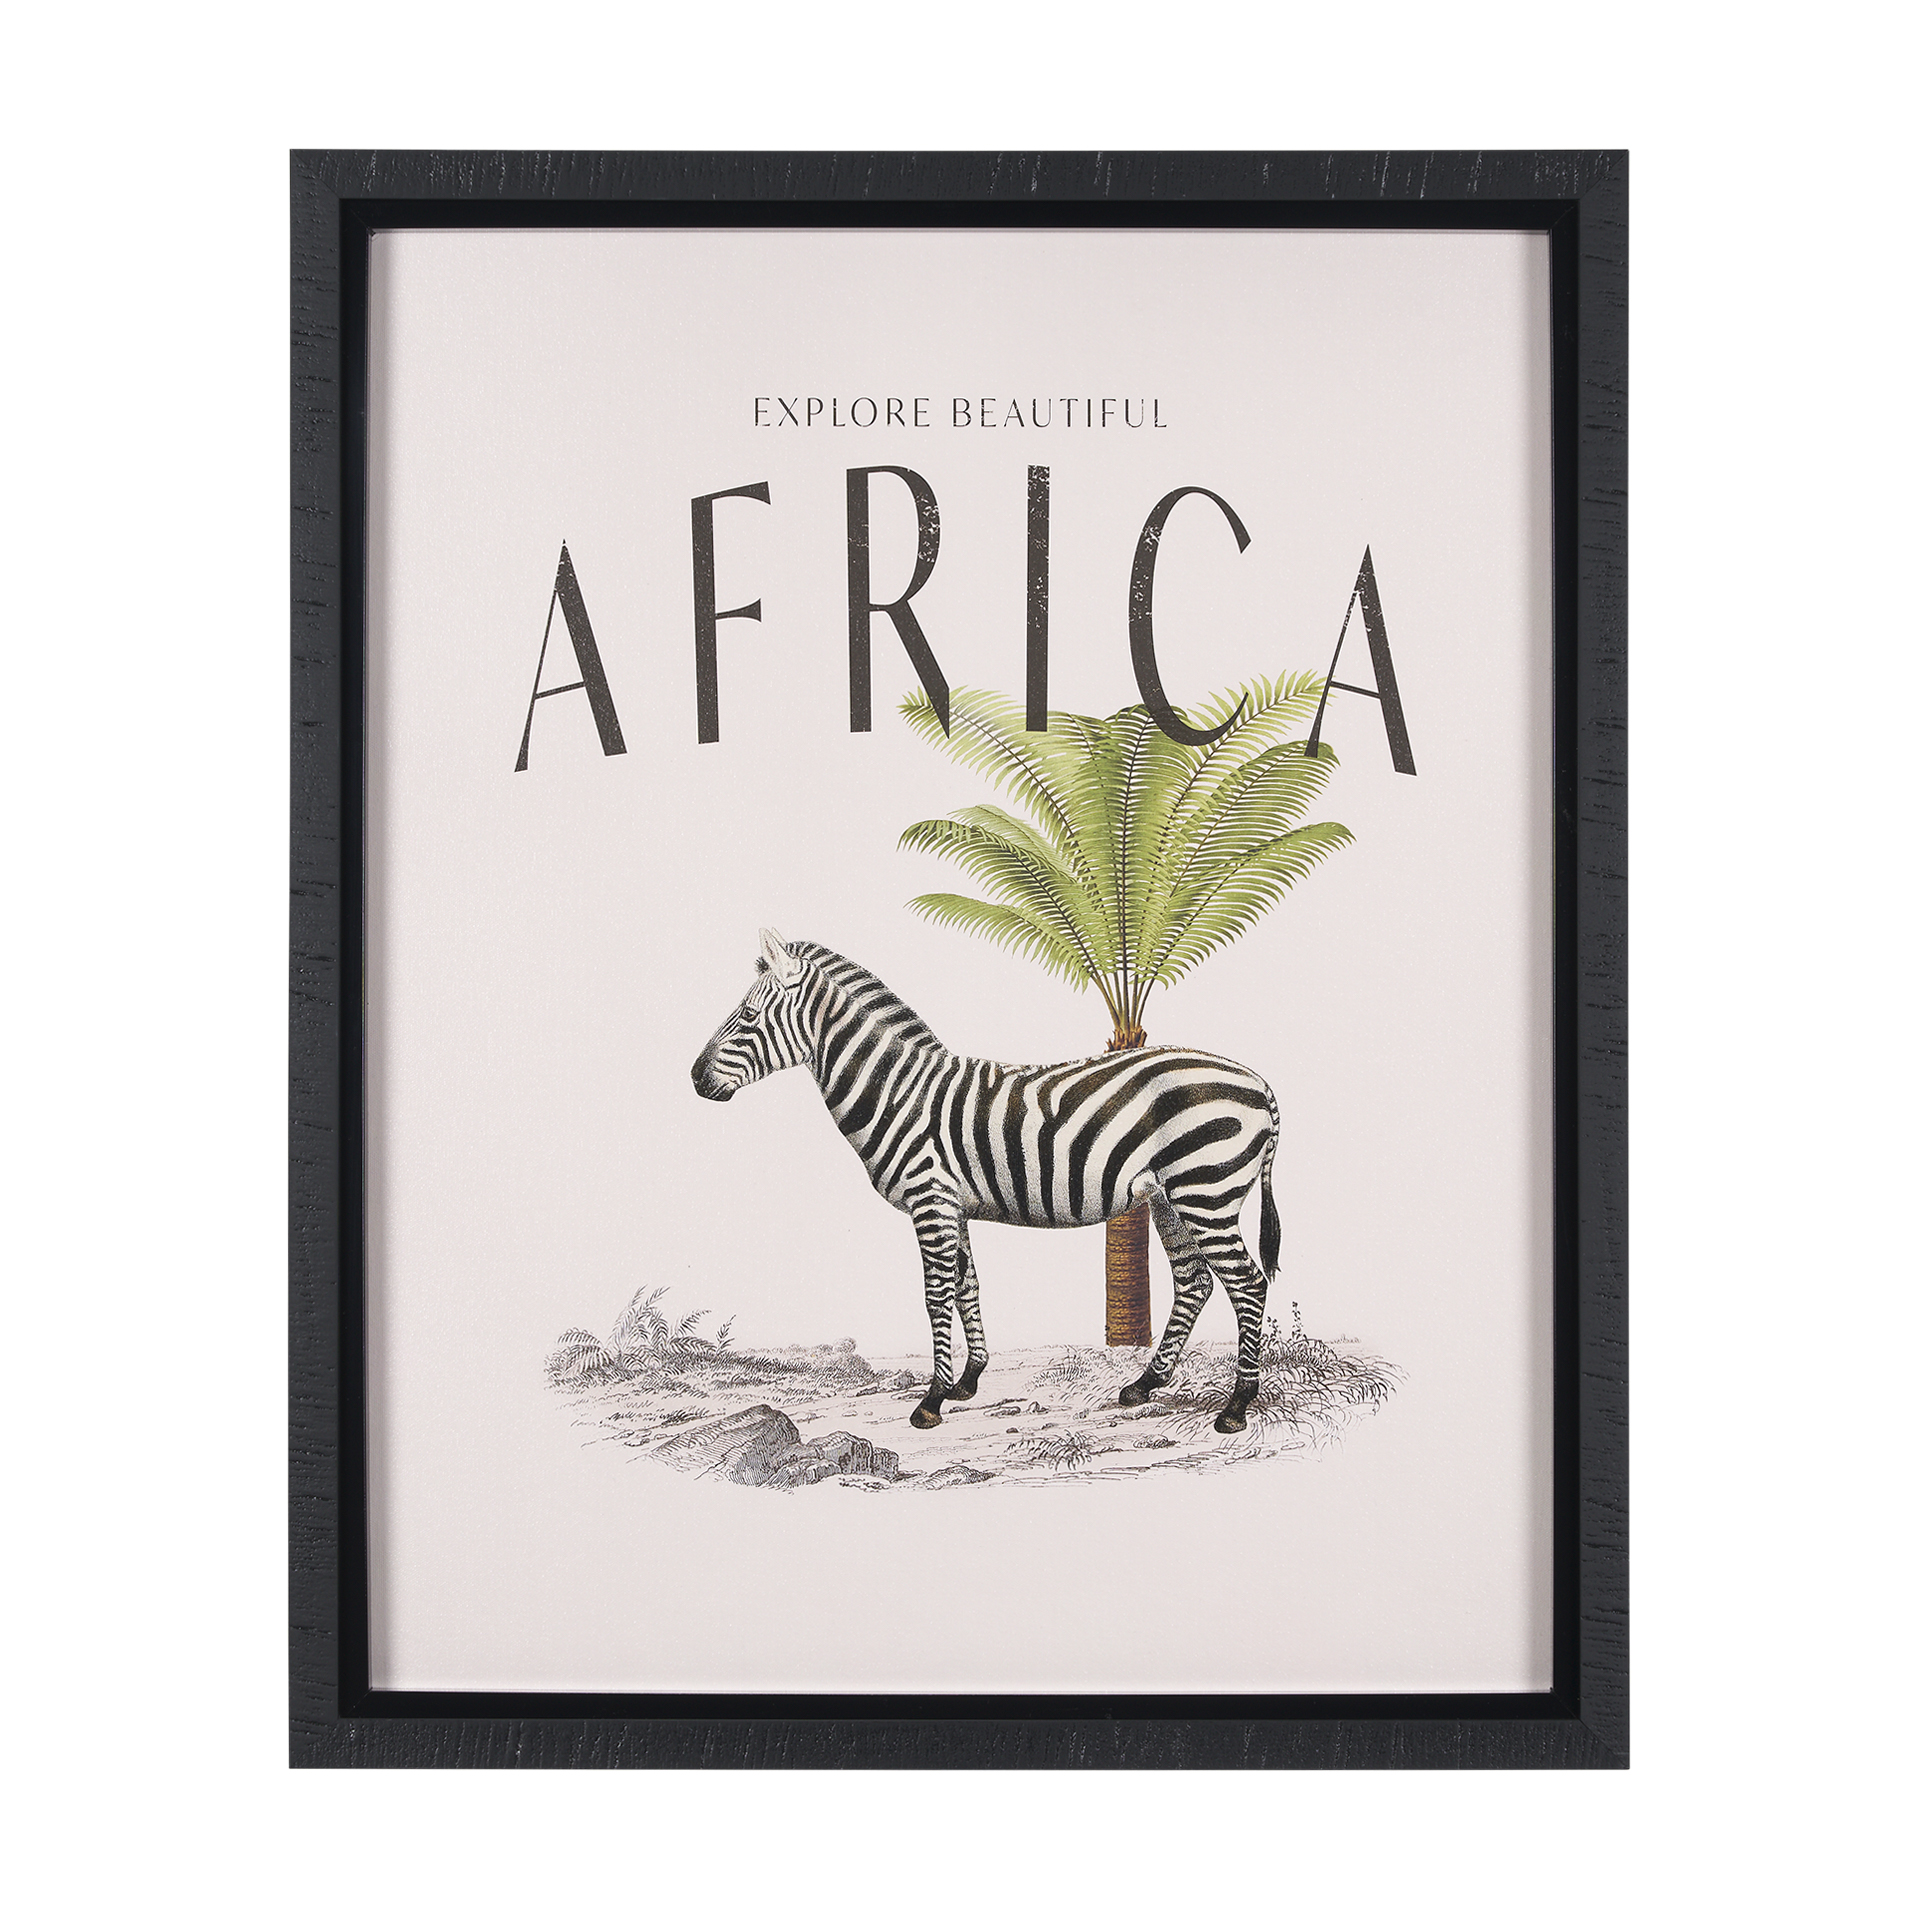 Travel Guide - Africa (26 x 32)